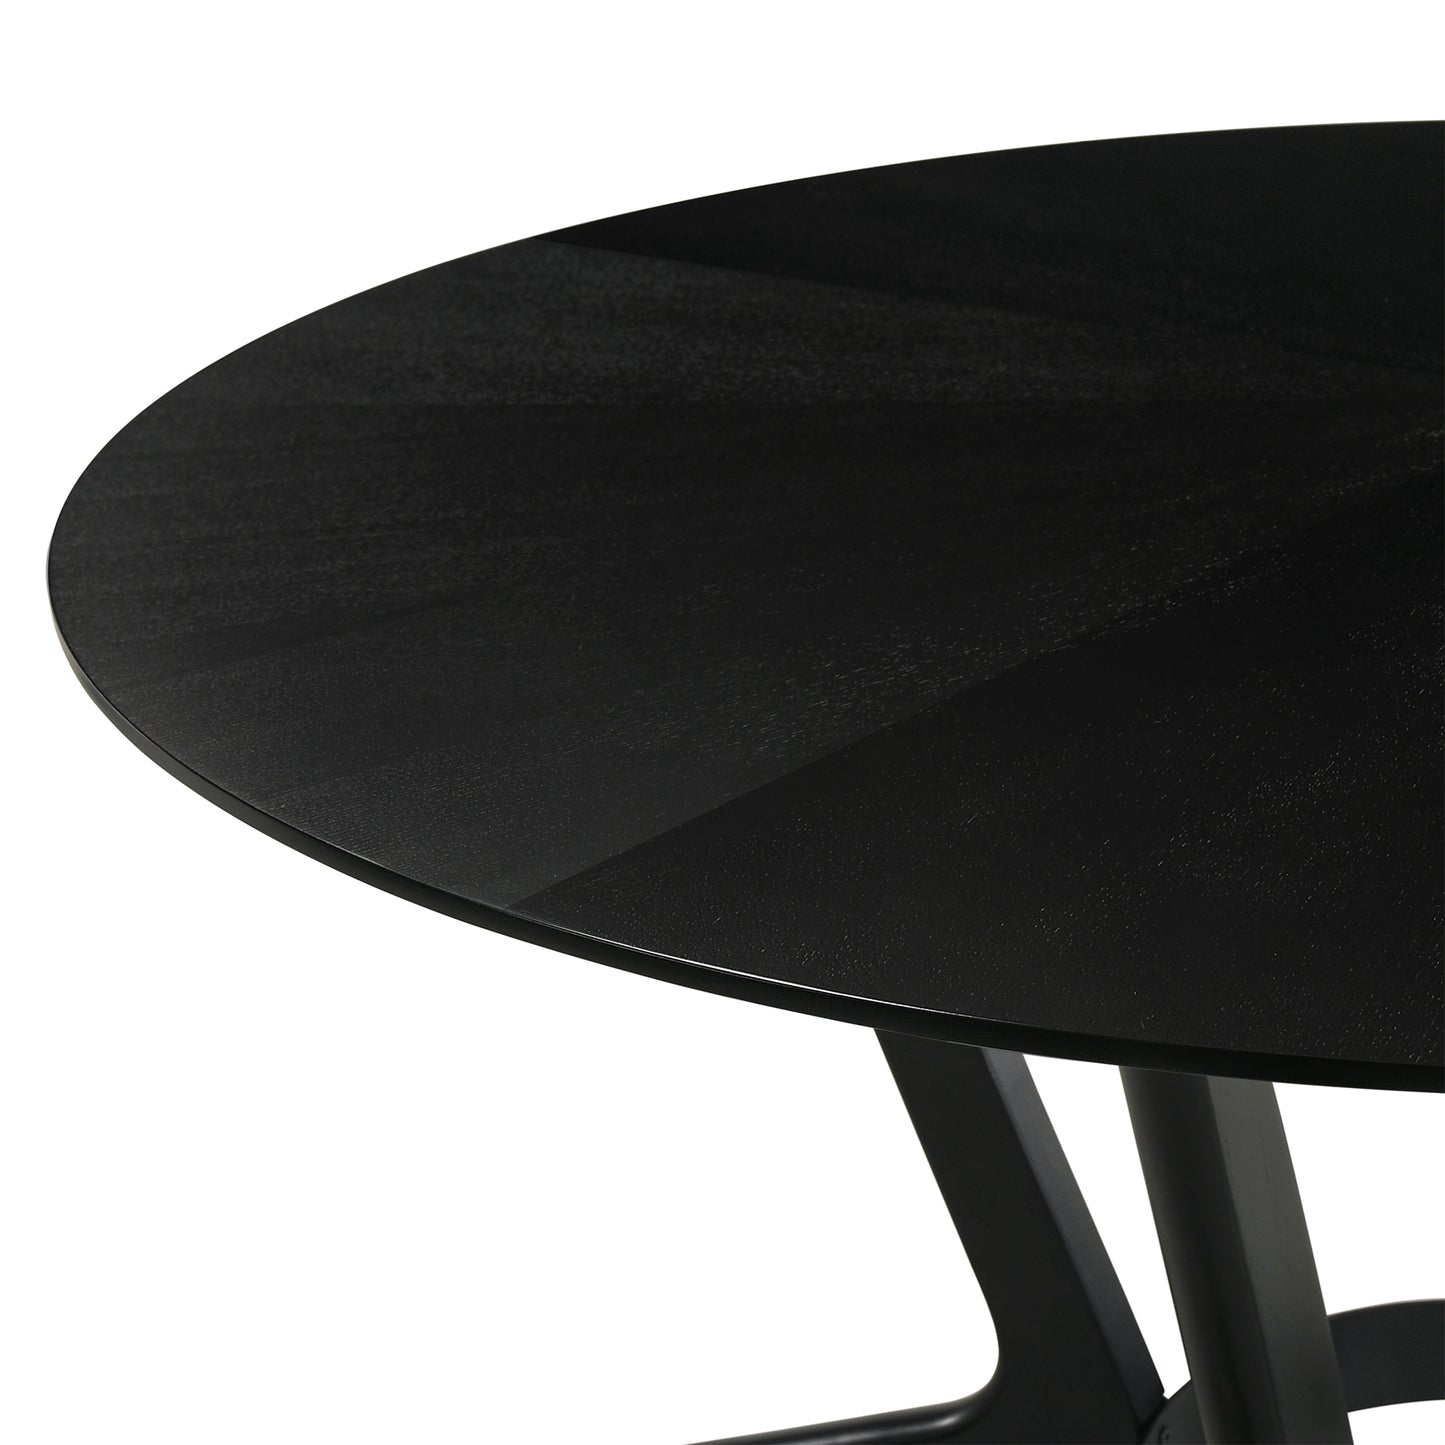 Santana Round Wood Dining Table in Black Finish